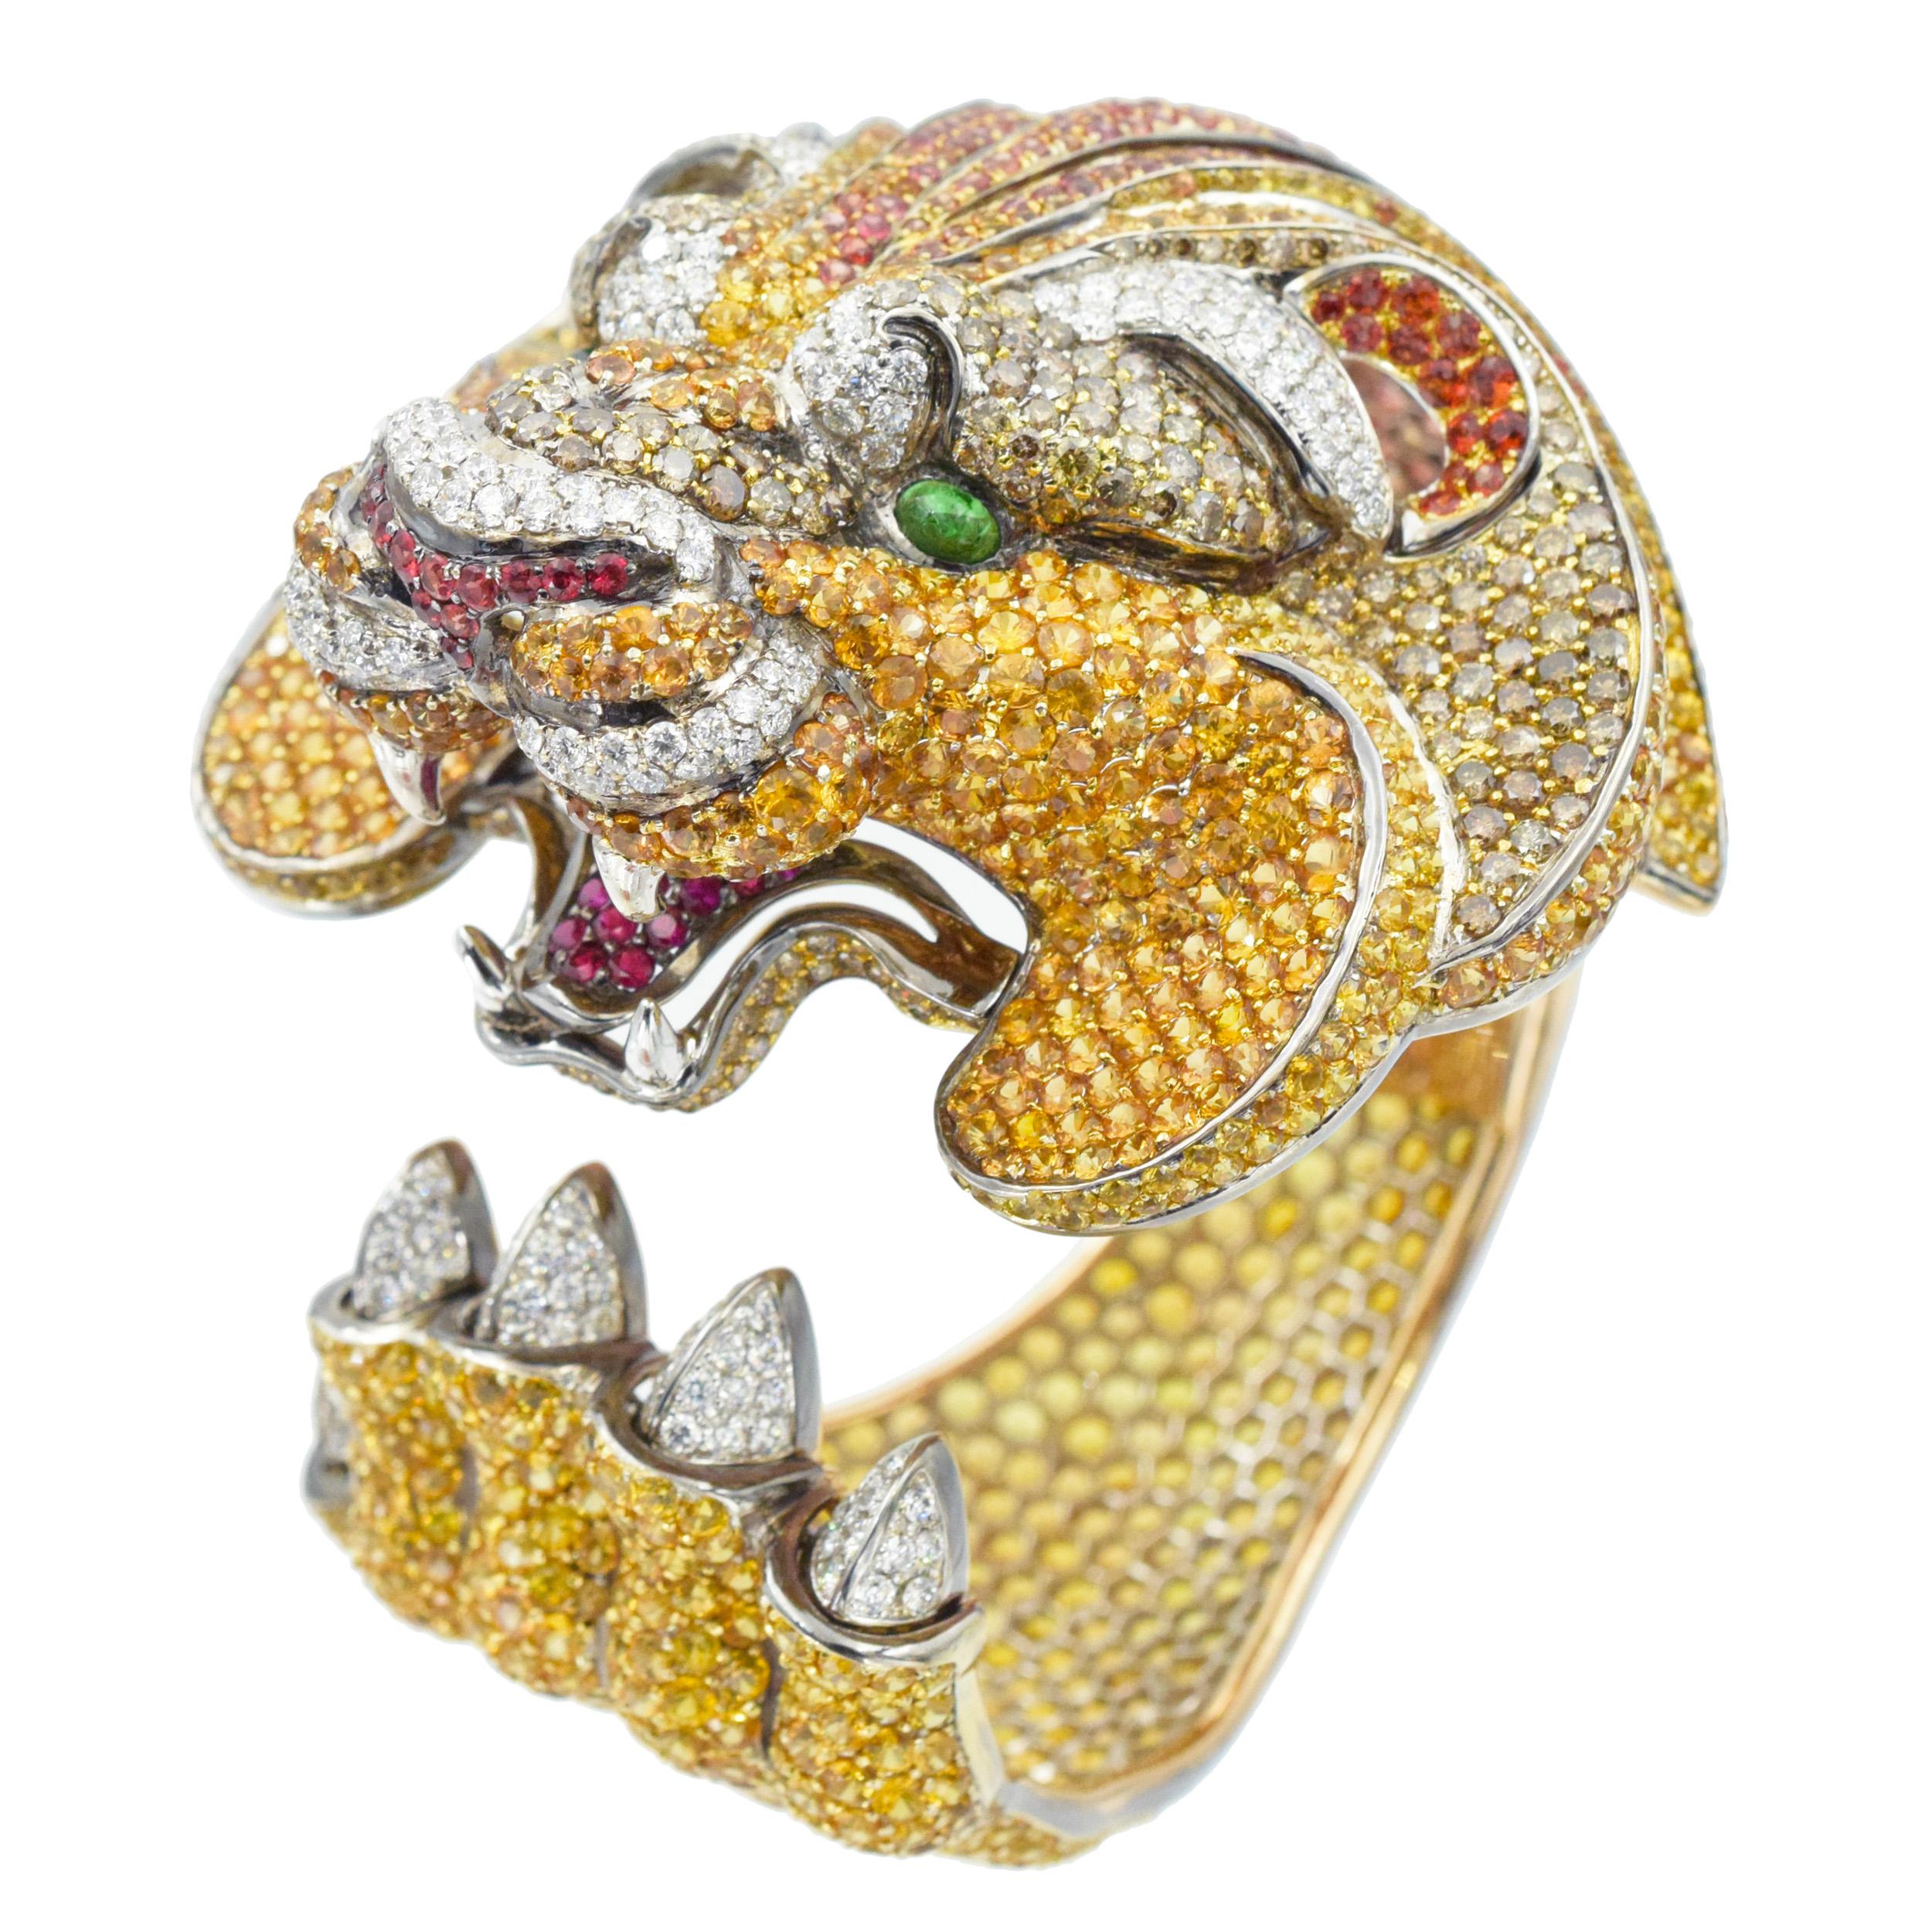 De Grisogono Diamond and gemstone lion cuff bracelet crafted in 18k gold. The design features lion head on one and a claw on the other end. Encrusted with 5.30ct of white round brilliant cut diamonds, 8.90ct of round brilliant cut brown diamonds,